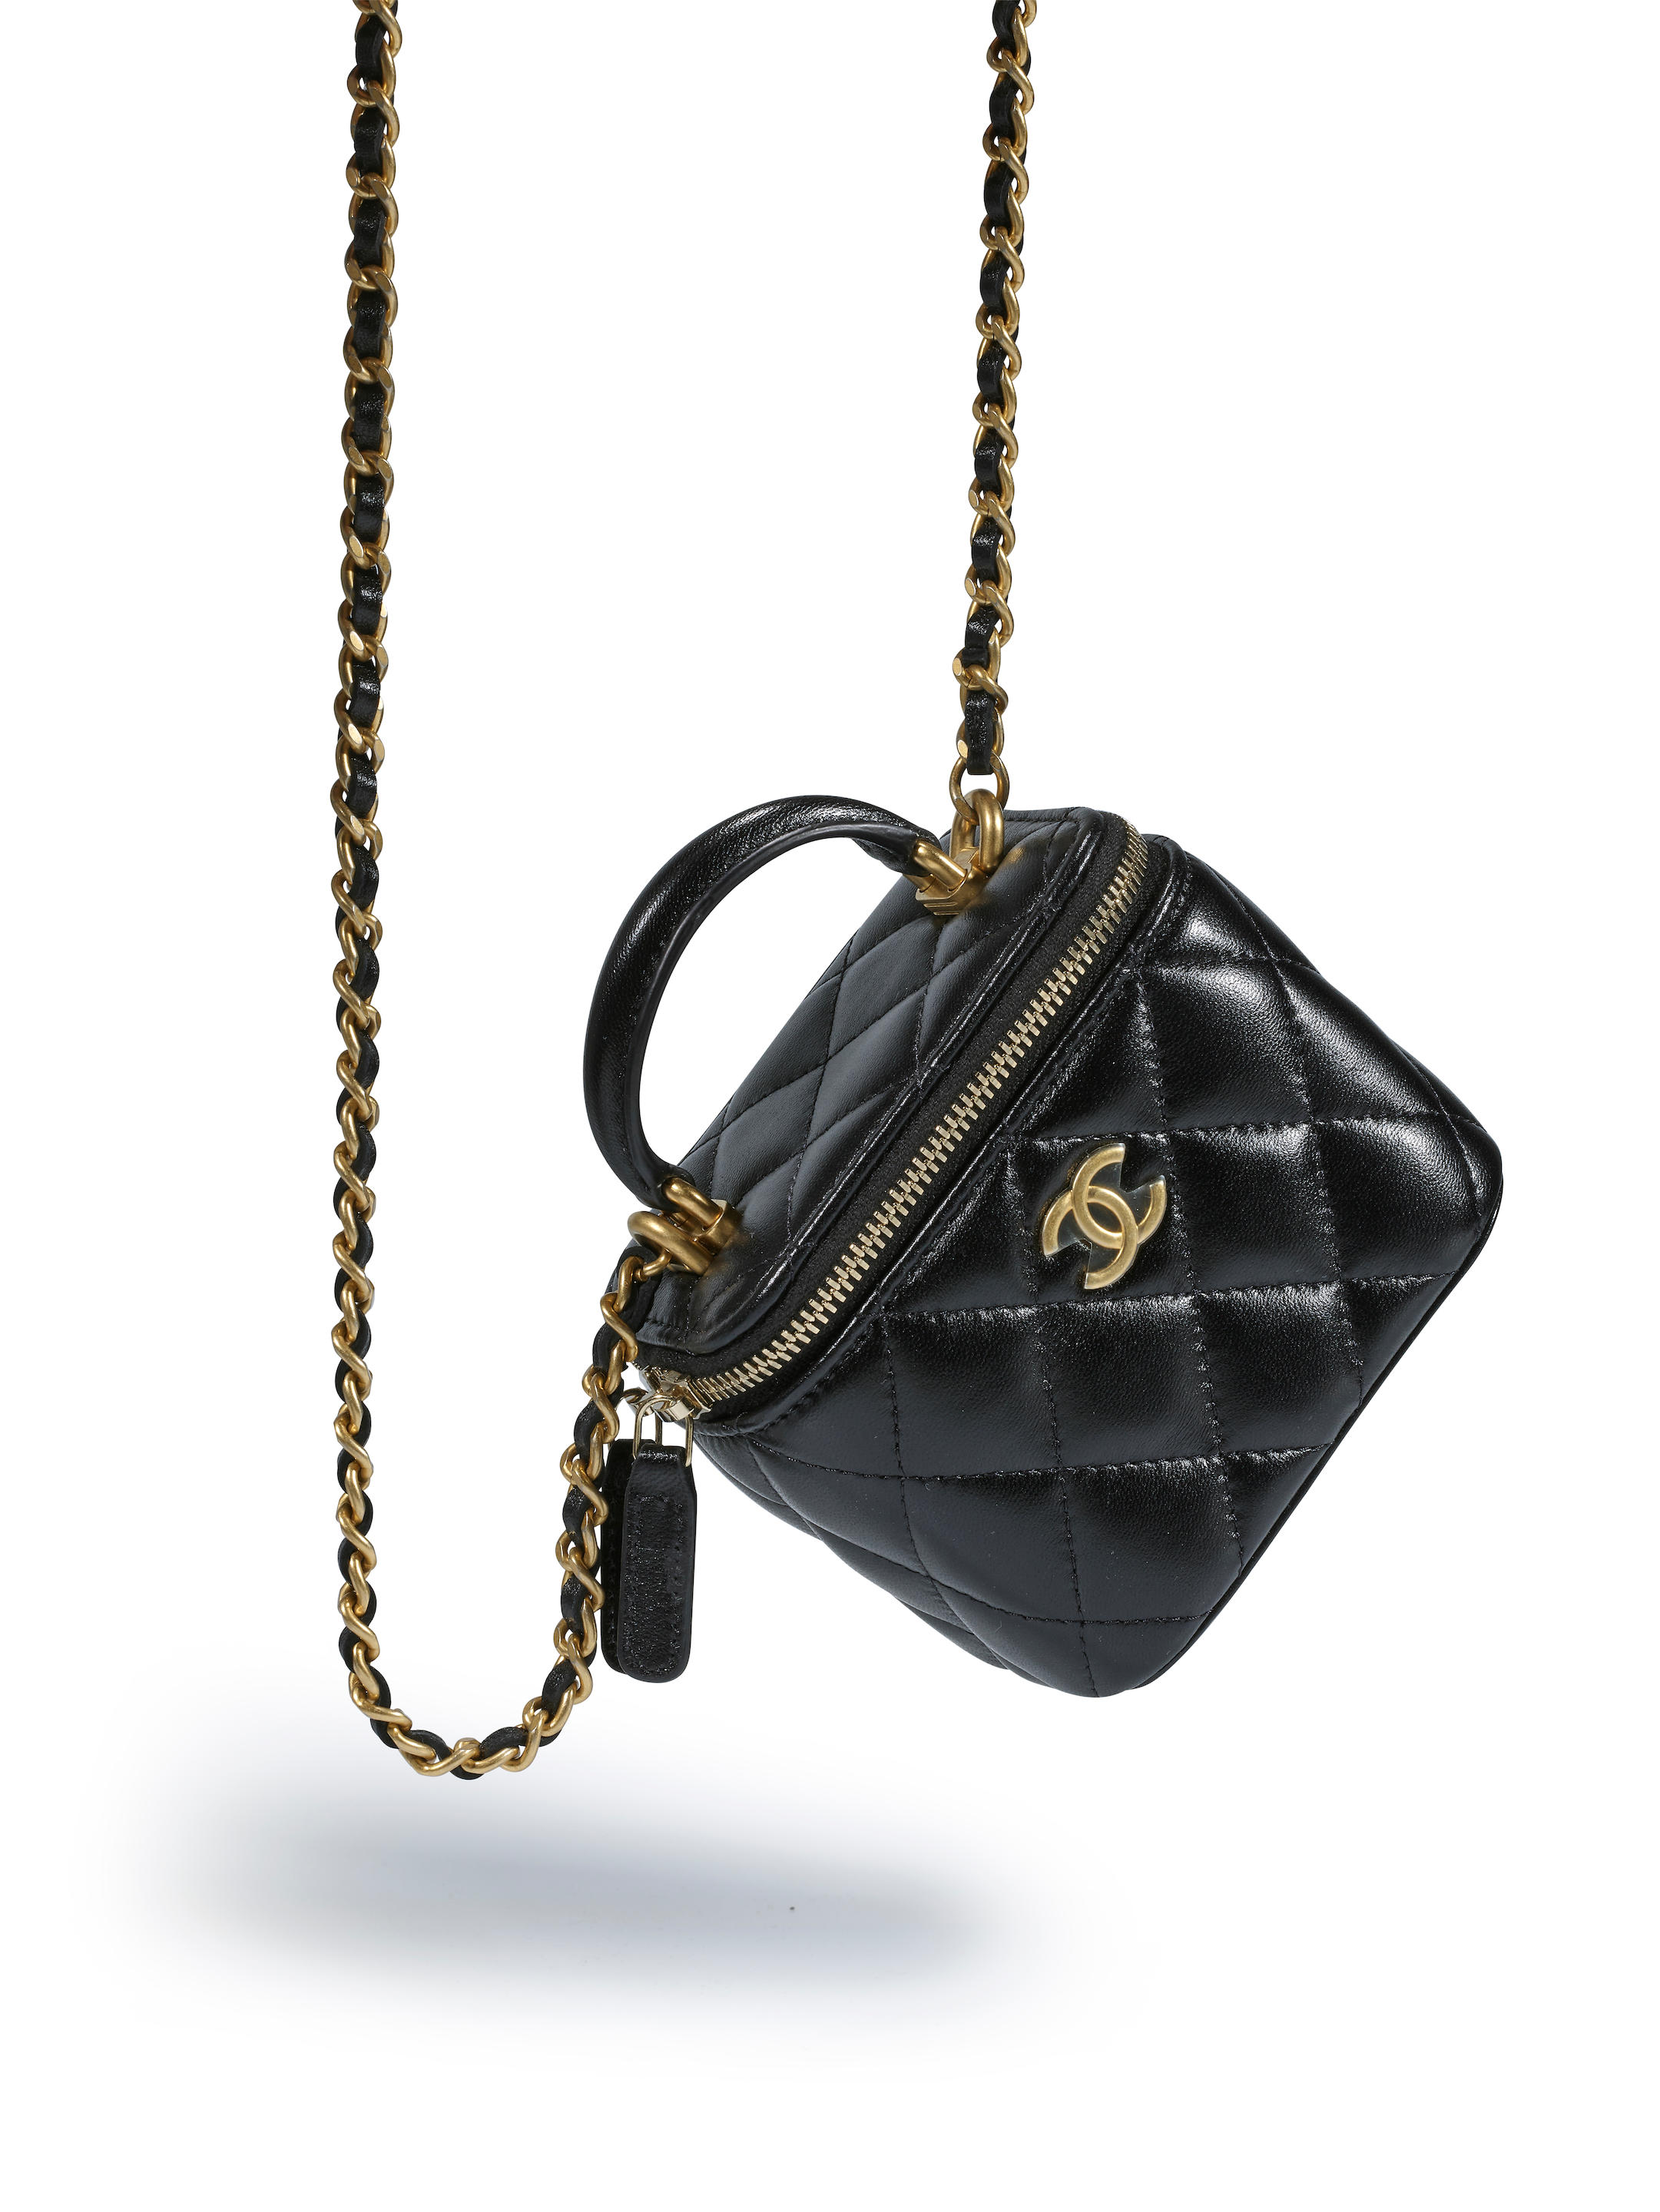 Bonhams : CHANEL NAVY AND BLACK LAMBSKIN LARGE GABRIELLE BAG (includes  authenticity card, original dust bag and box)